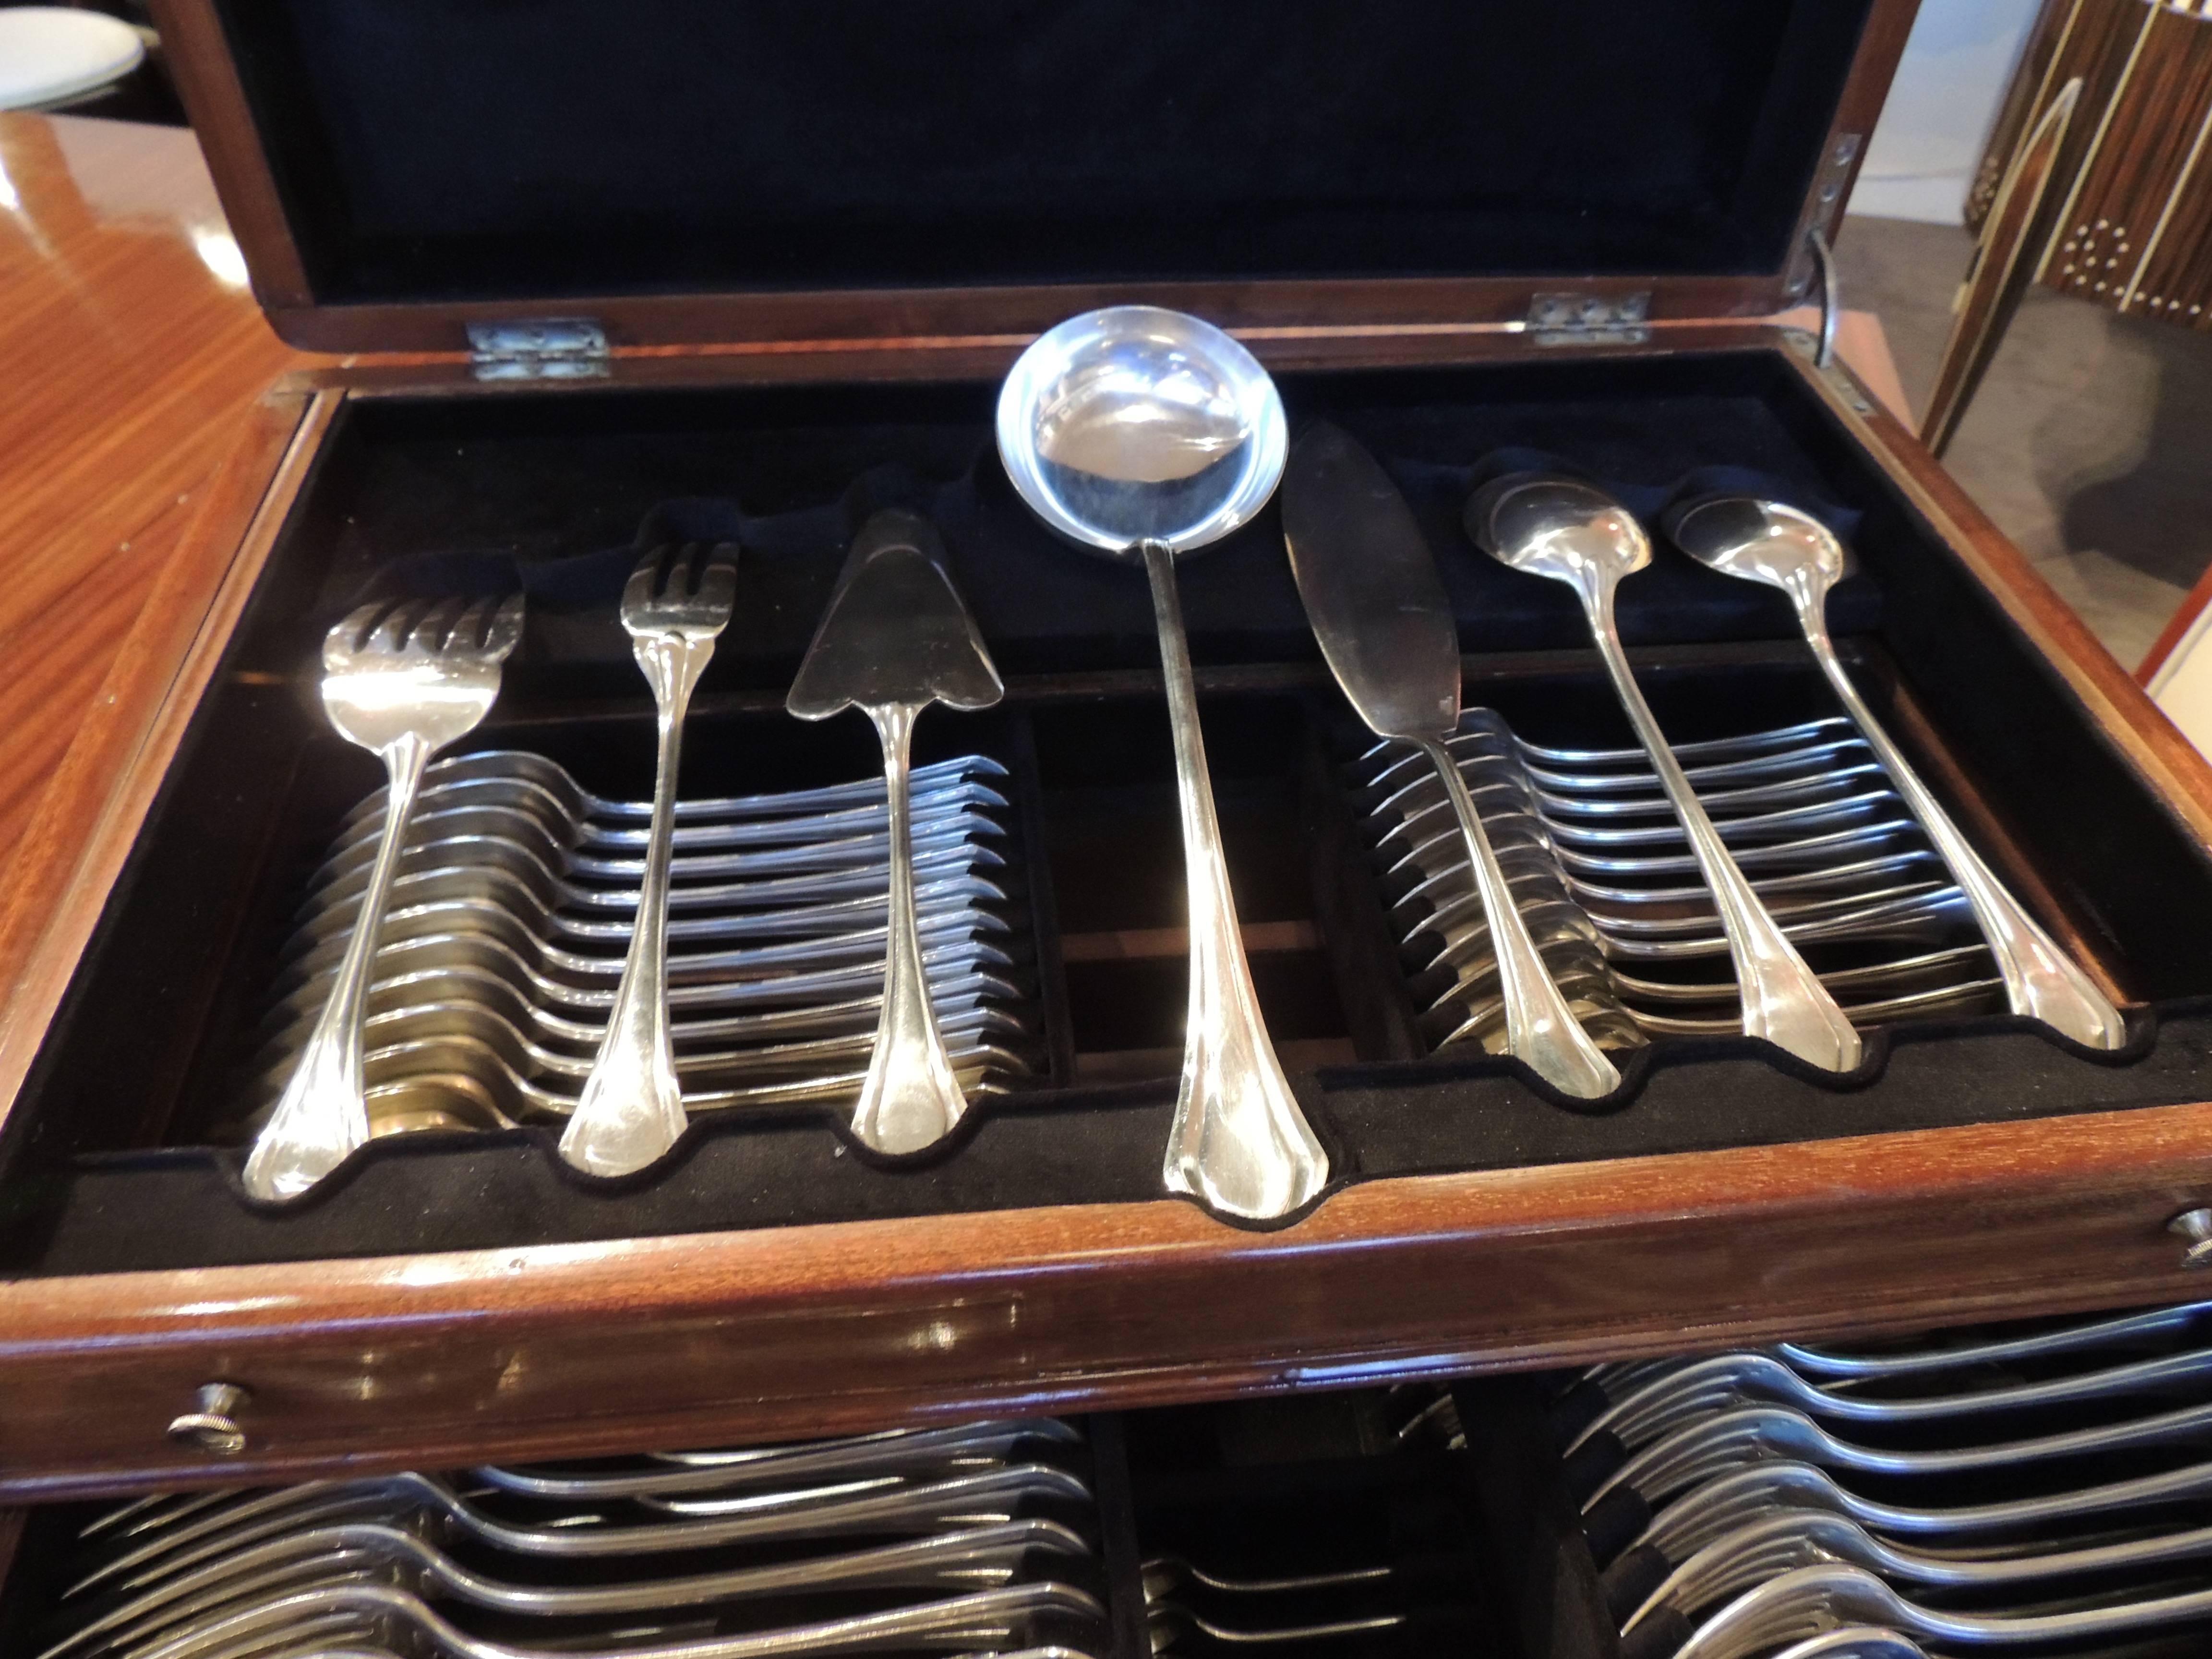 This Art Deco silver set by Christofle in the pattern “Printania” was designed in 1925 and while it is an heirloom that harkens back to the jazz age of the 1920s it is as fresh and contemporary as something designed today with its clean lines and